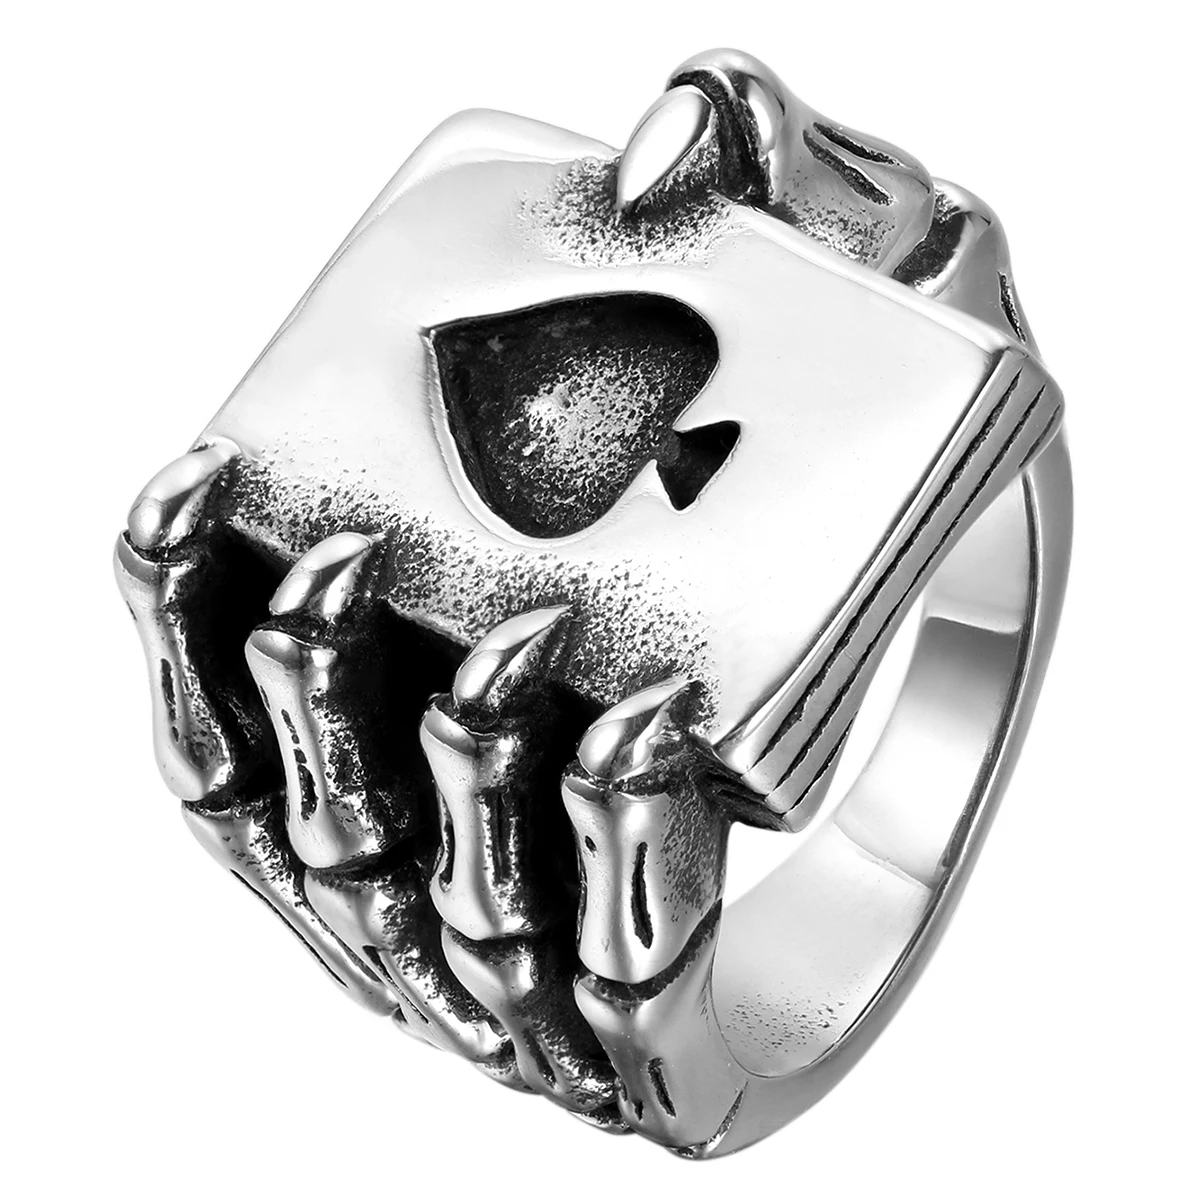 BONISKISS 2022 New Gothic Skull Hand Claw Poker Playing Card Ring Classic Stainless Steel Men's Ring Bijoux Aneis Jewelry Gift